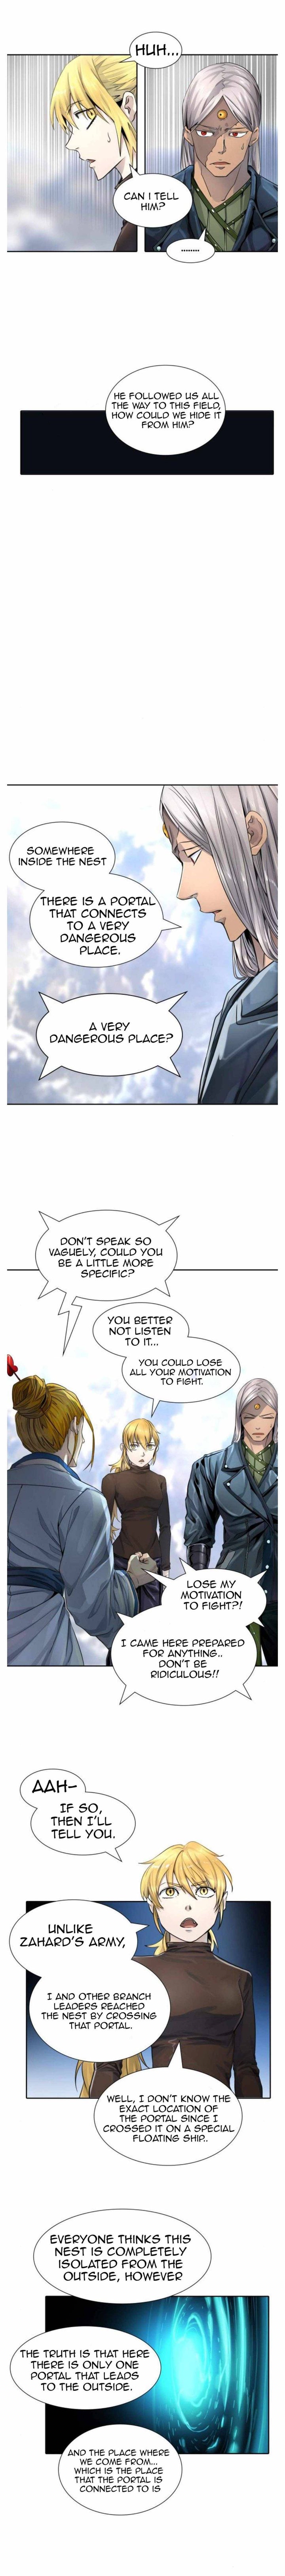 Tower Of God 502 28